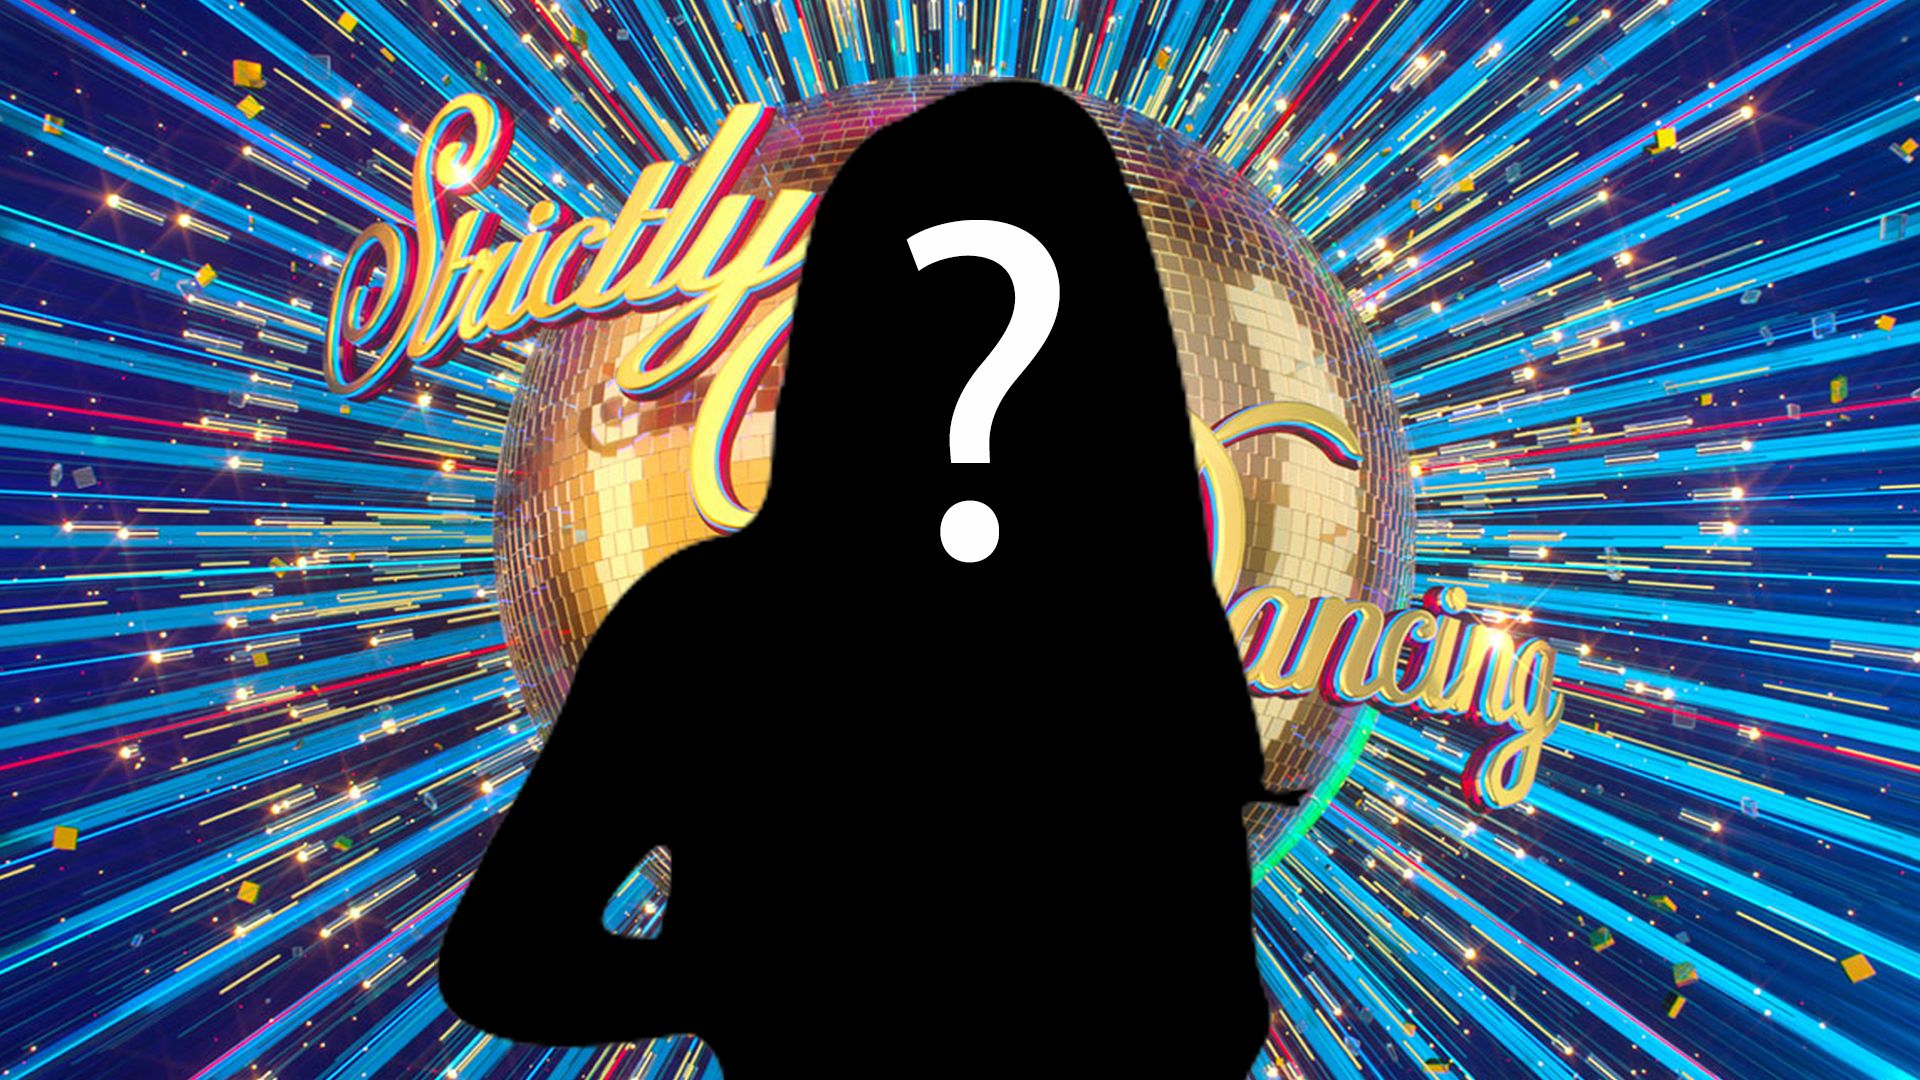 Strictly Come Dancing mystery woman 2